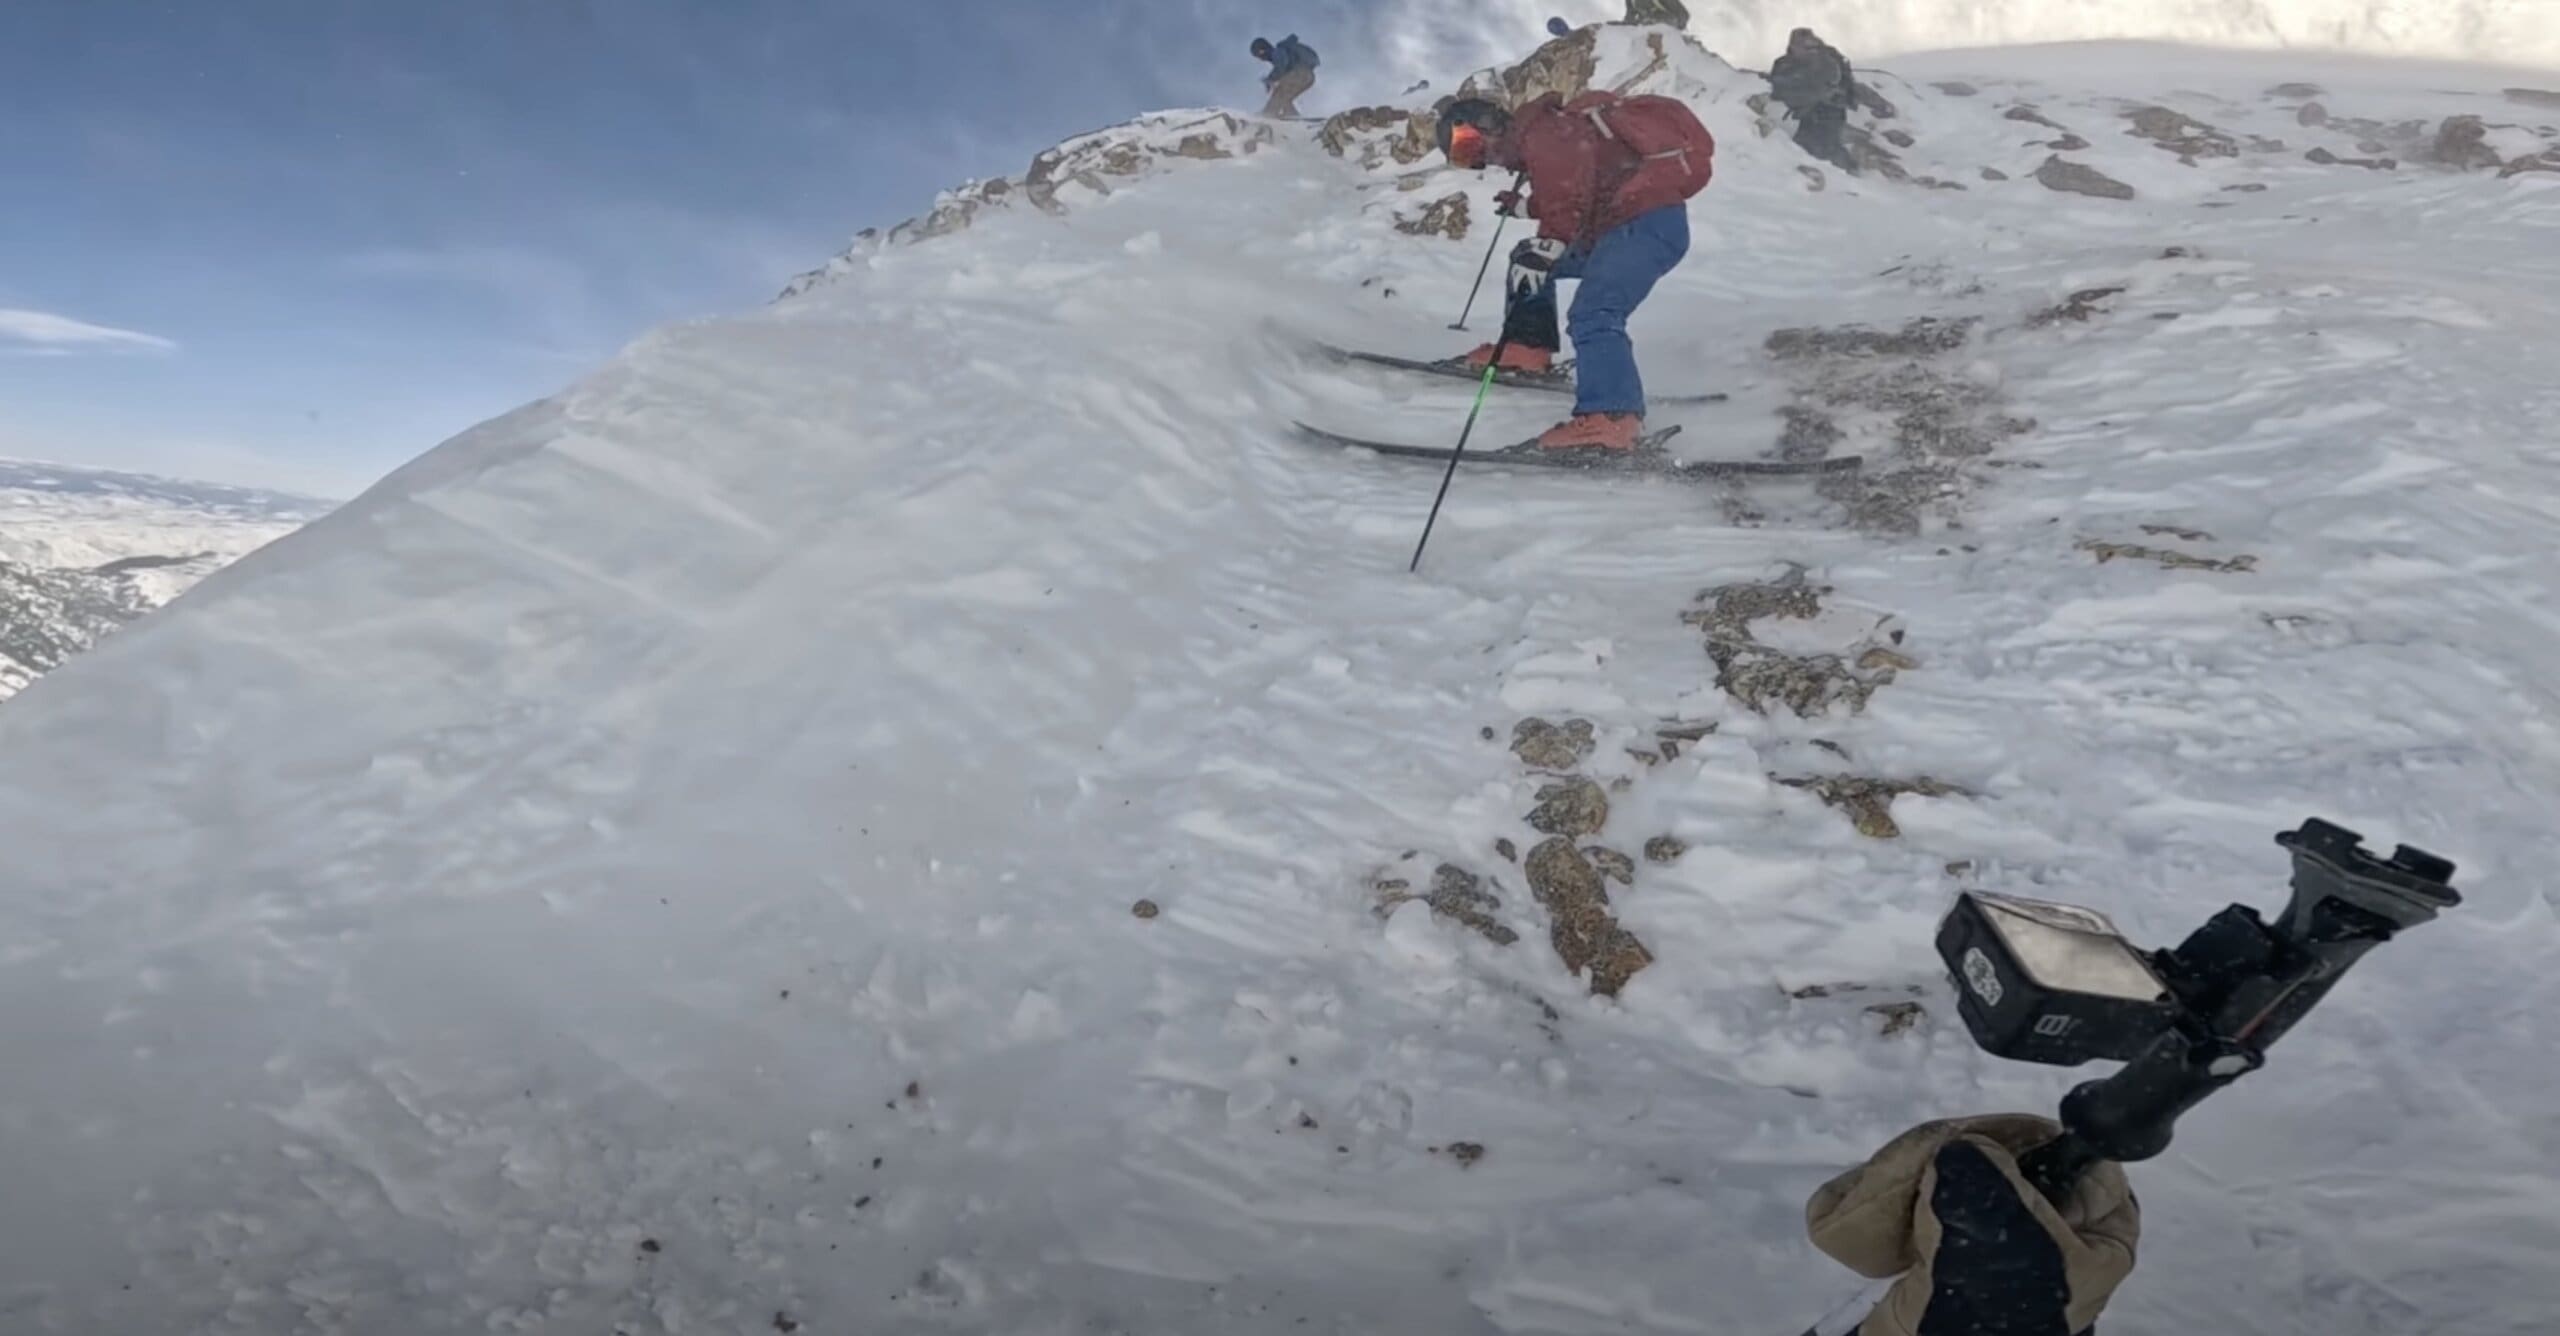 WATCH: Skiing The Hardest Chute At Snowbird - Unofficial Networks